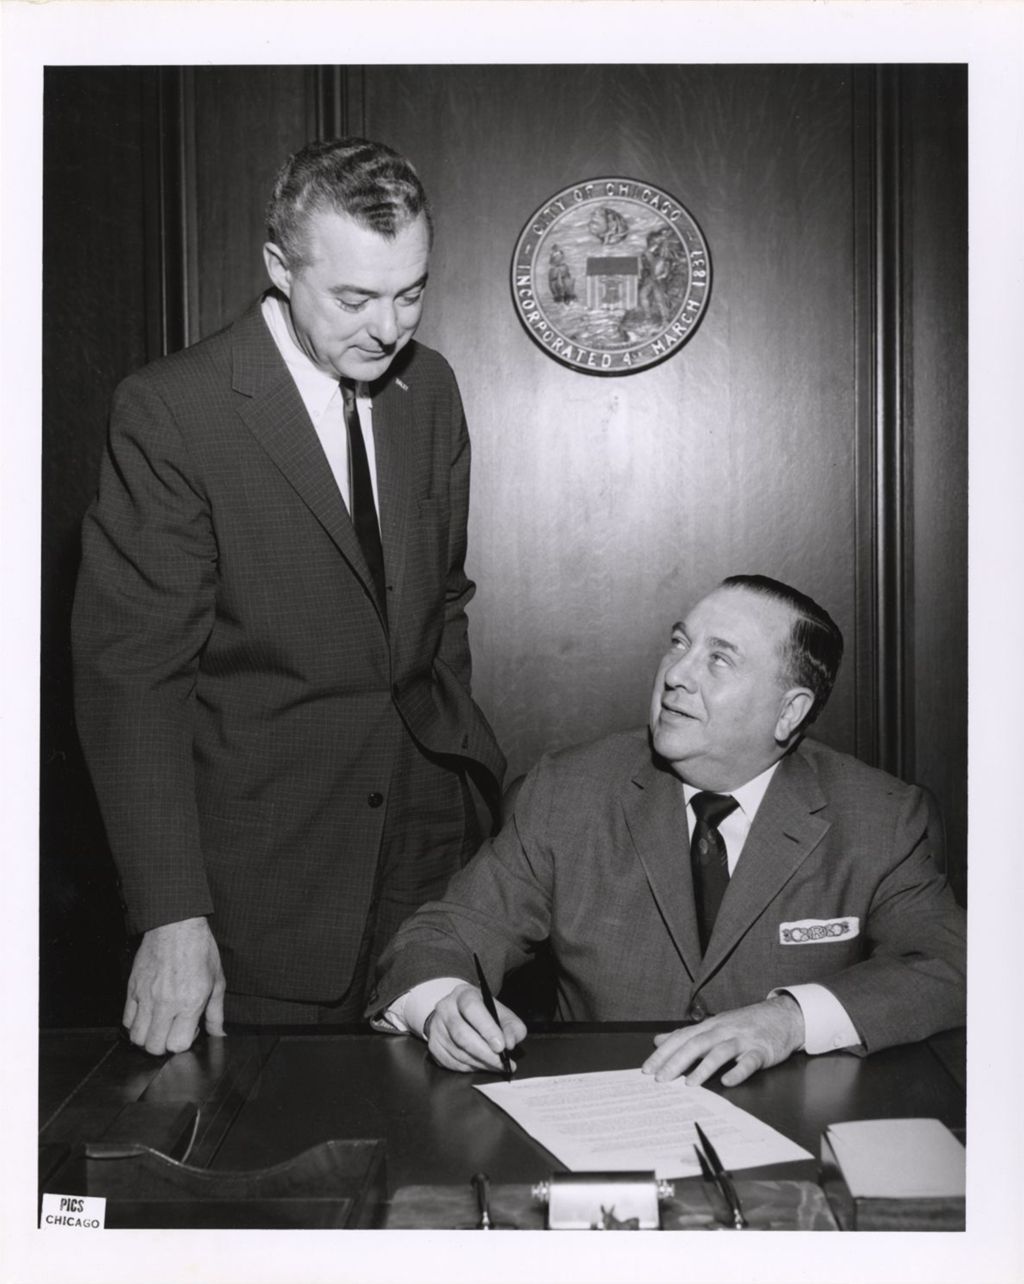 Miniature of Richard J. Daley signing a document at his desk